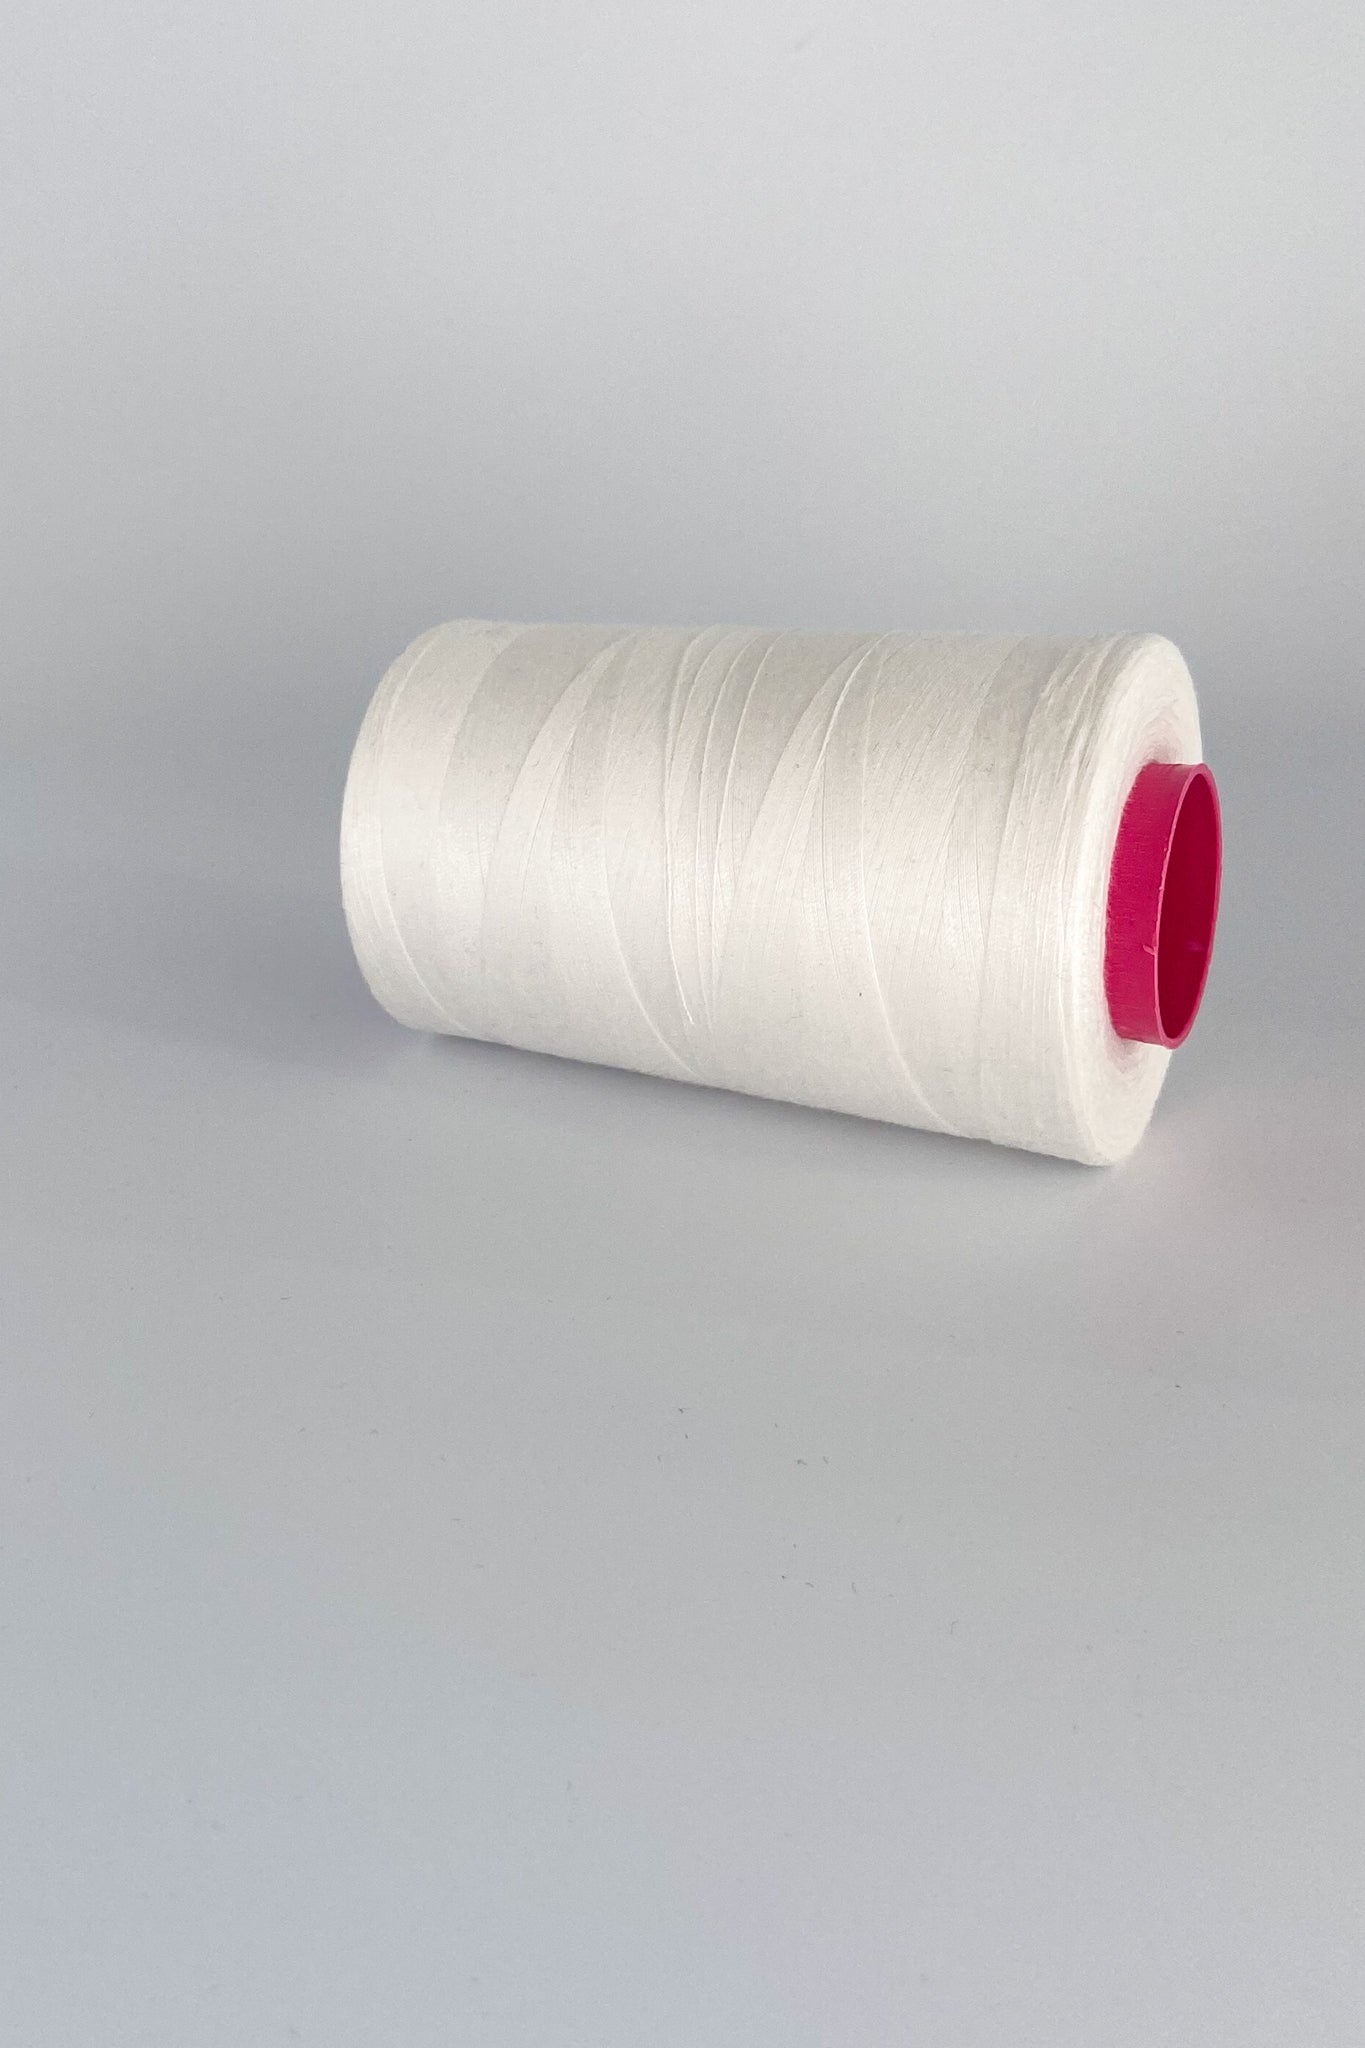 Spool of cellulose, tencel sewing thread in natural